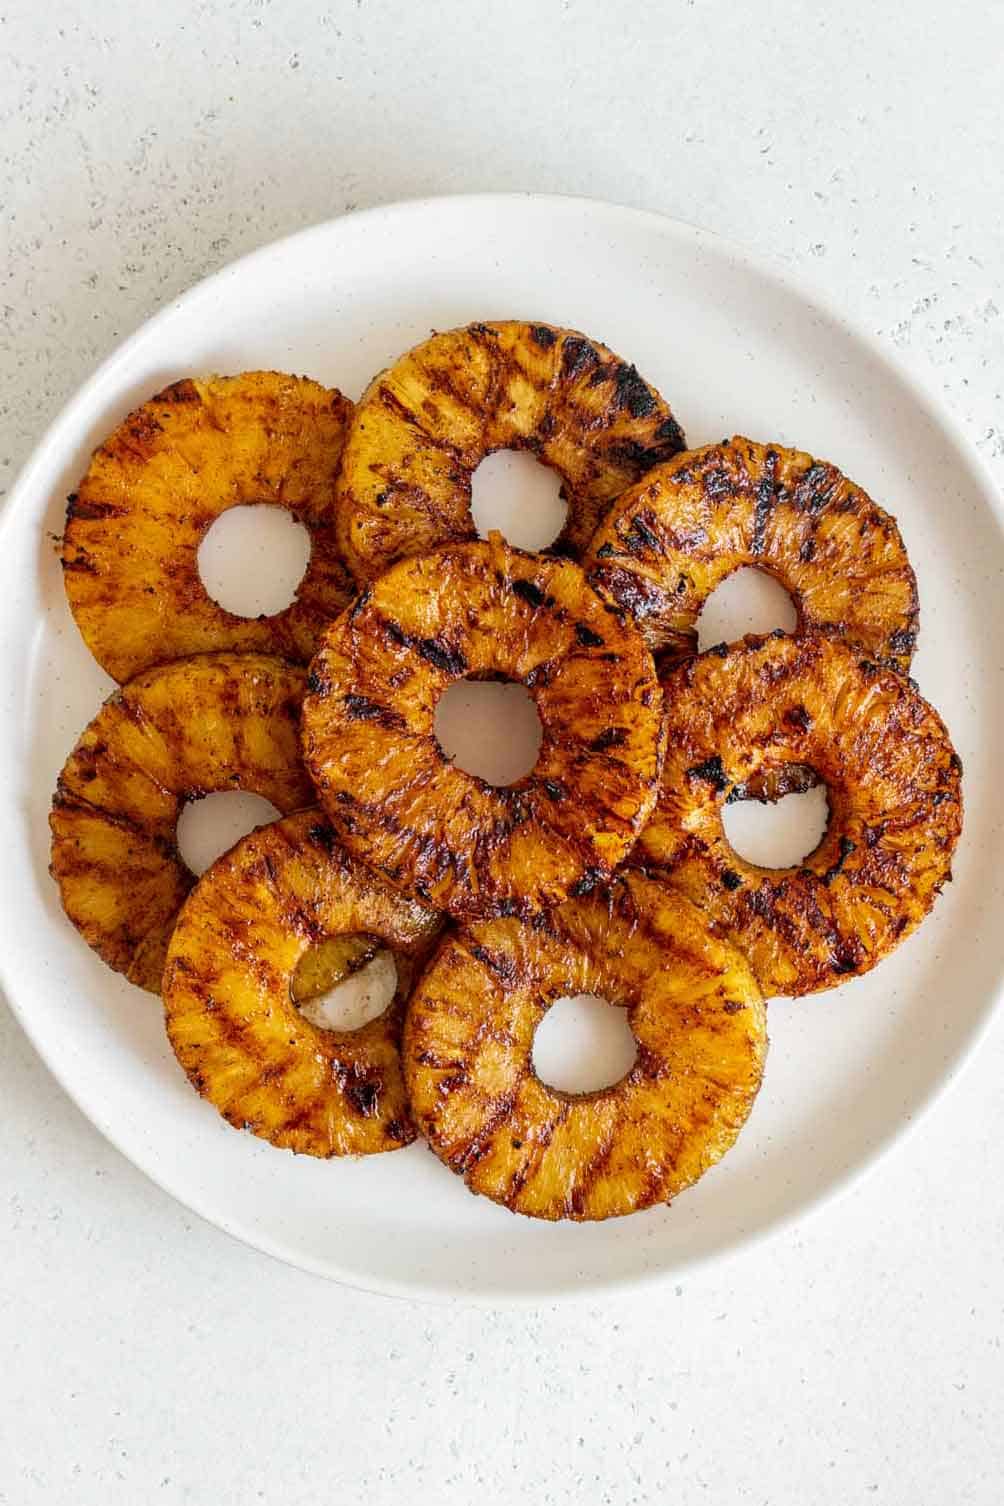 Overhead view of a plate with multiple grilled pineapple rings.